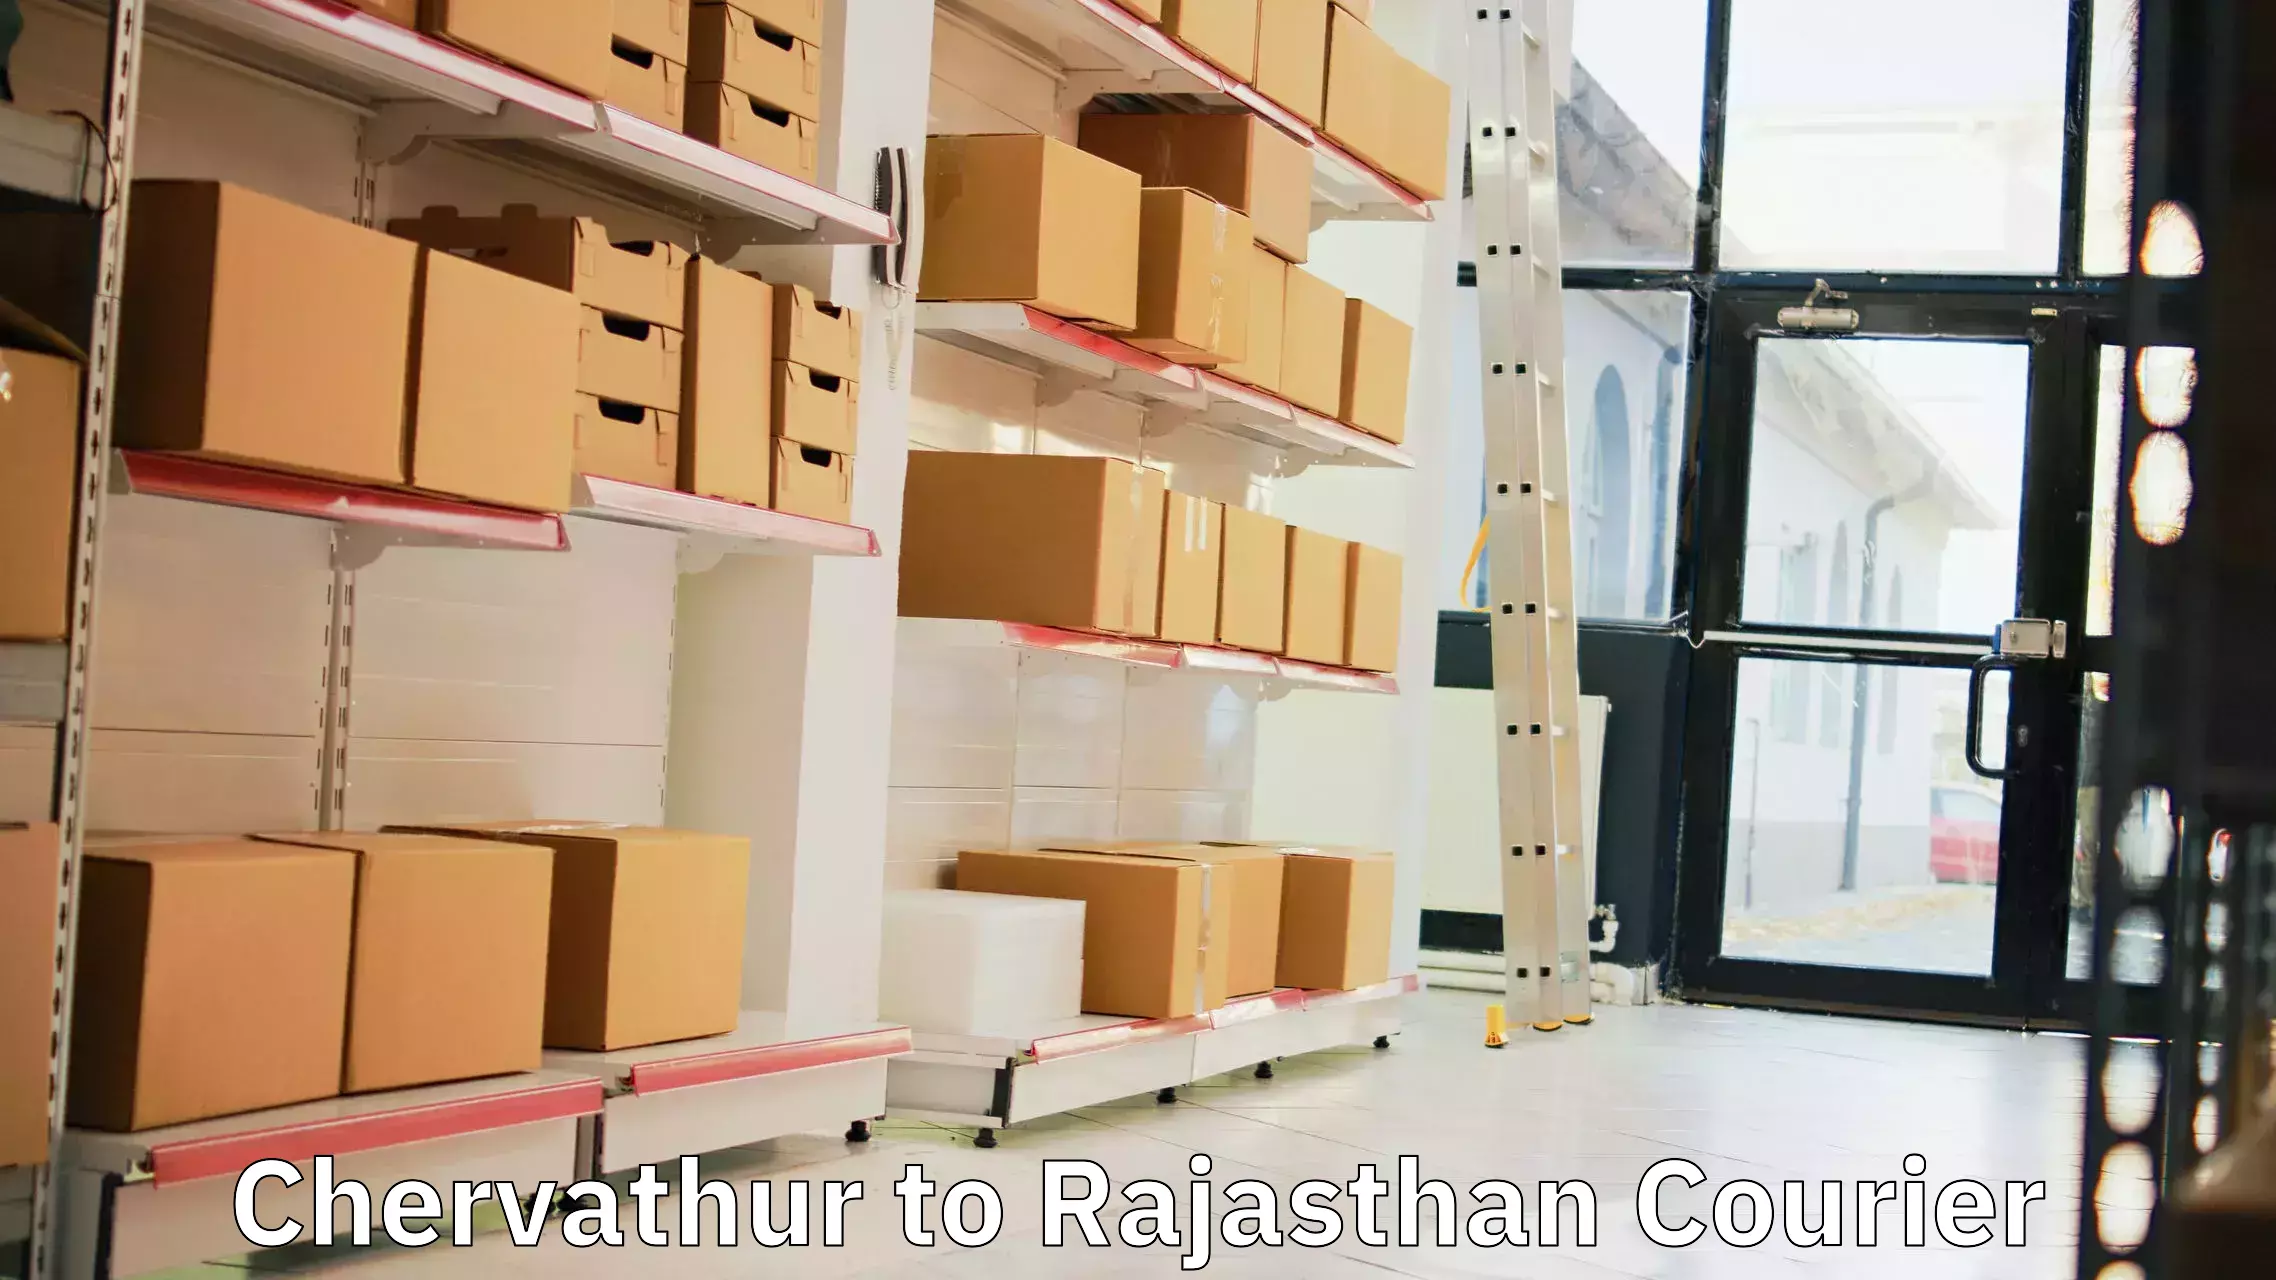 Global courier networks Chervathur to Rajgarh Rajasthan